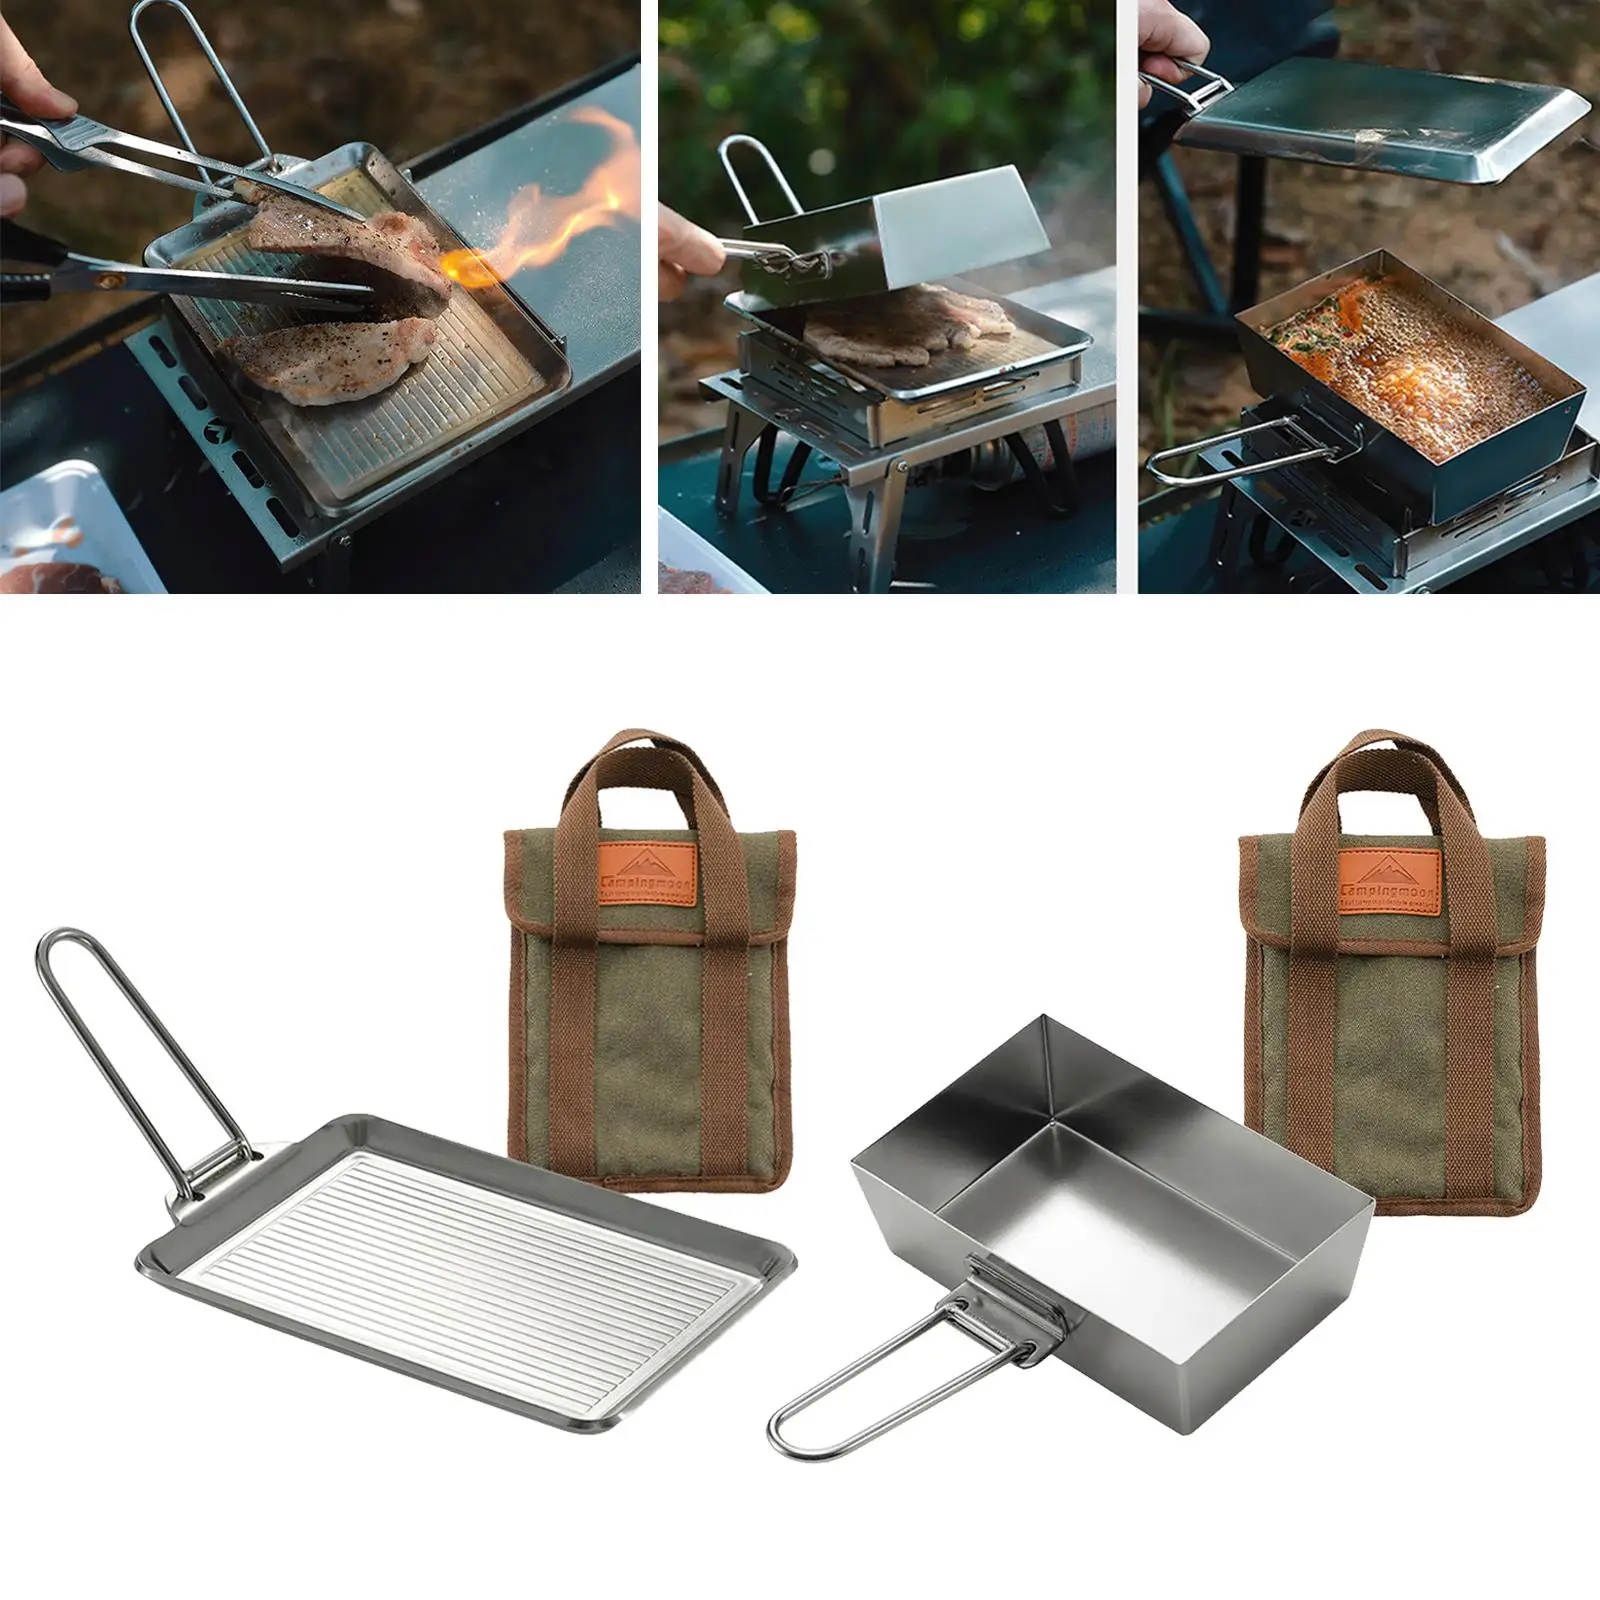 Portable Camping Frying Pan Foldable Handle Picnic Utensil with Storage Bag